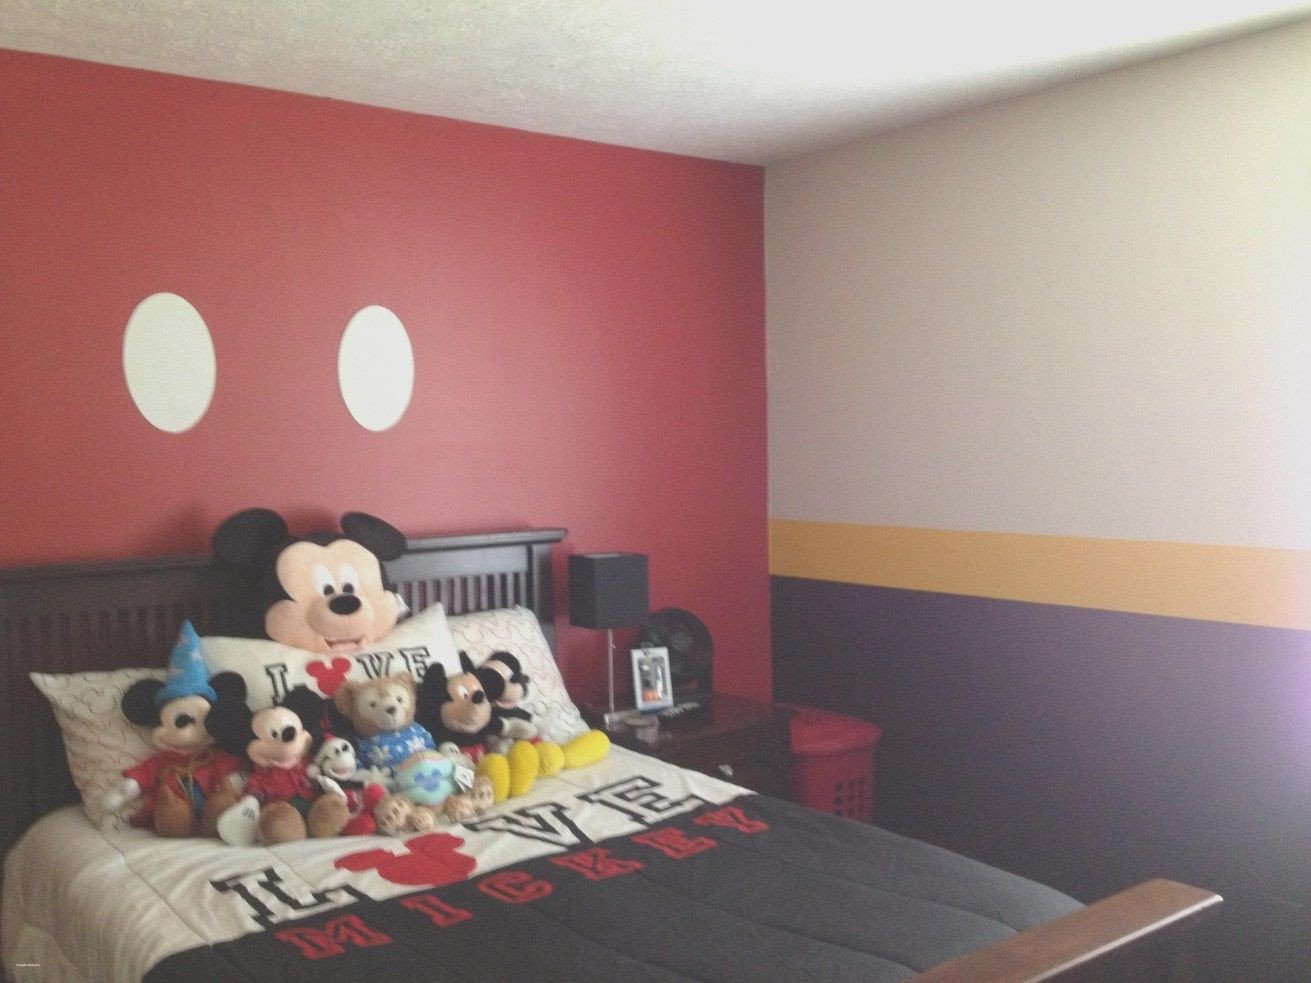 Mickey Mouse Bedroom Accessories Unique Disney House Decorations Ideas Mickey Mouse Lovely